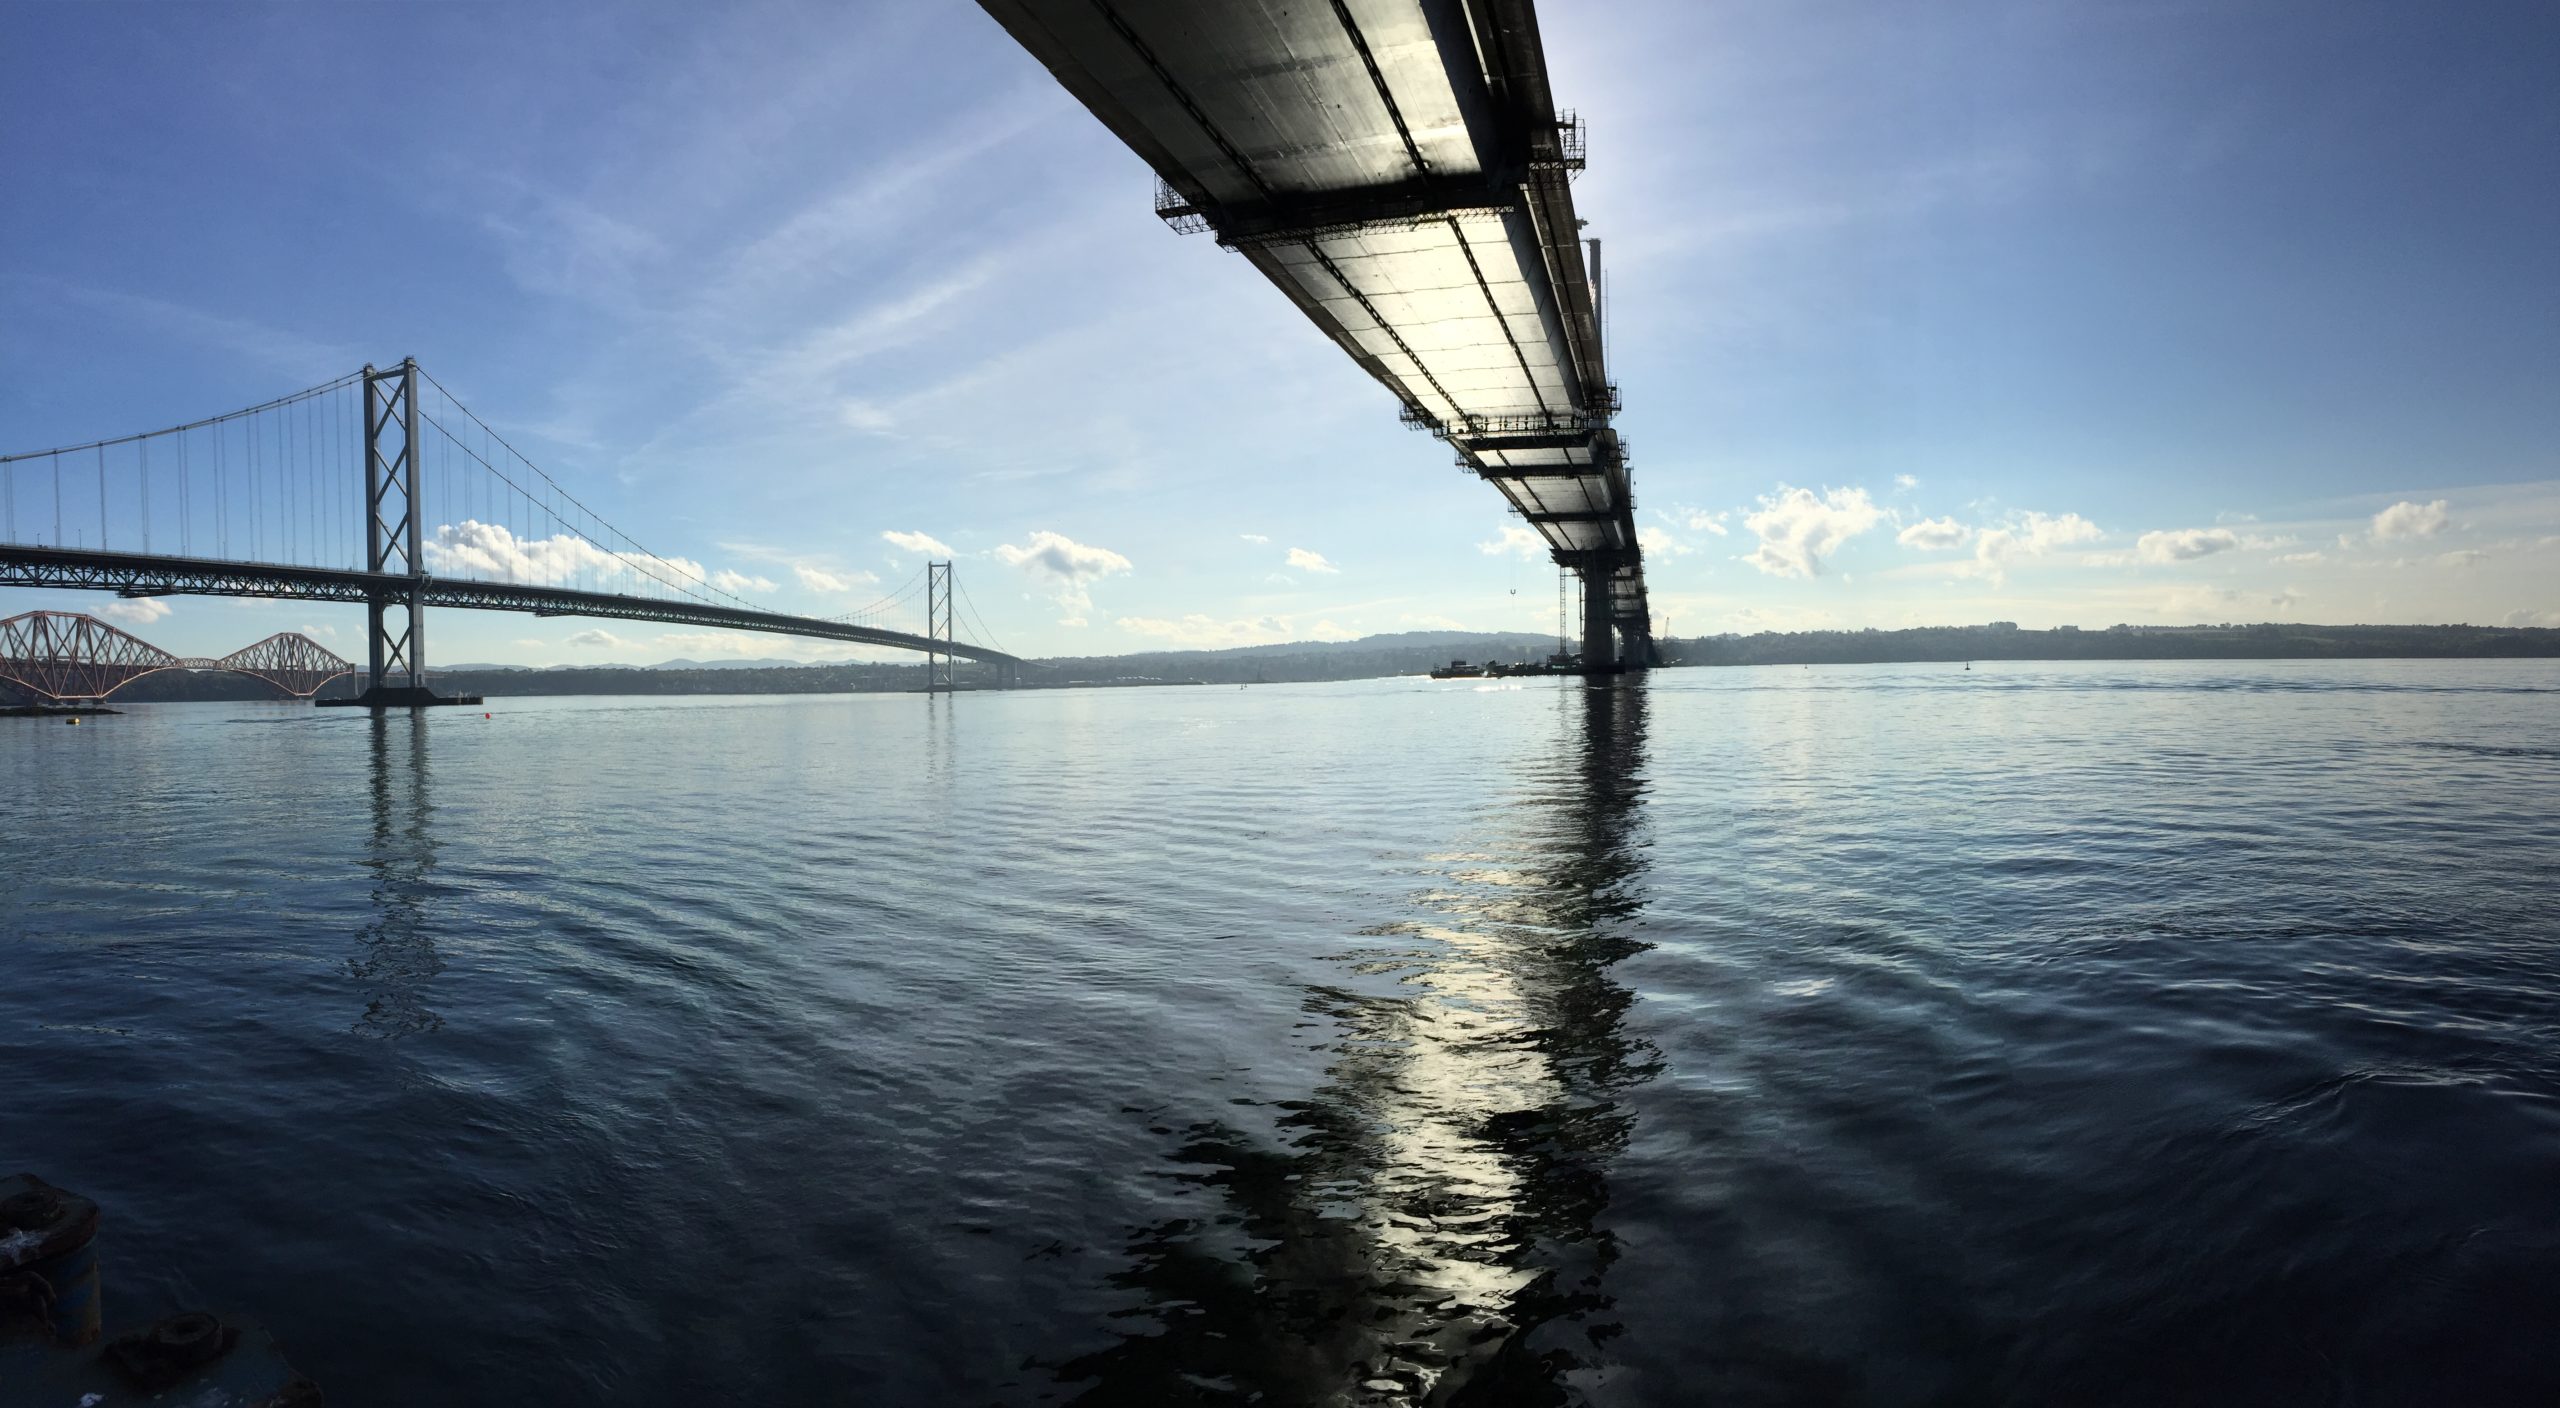 Underdeck maintenance case civil and structural engineering project queensferry crossing